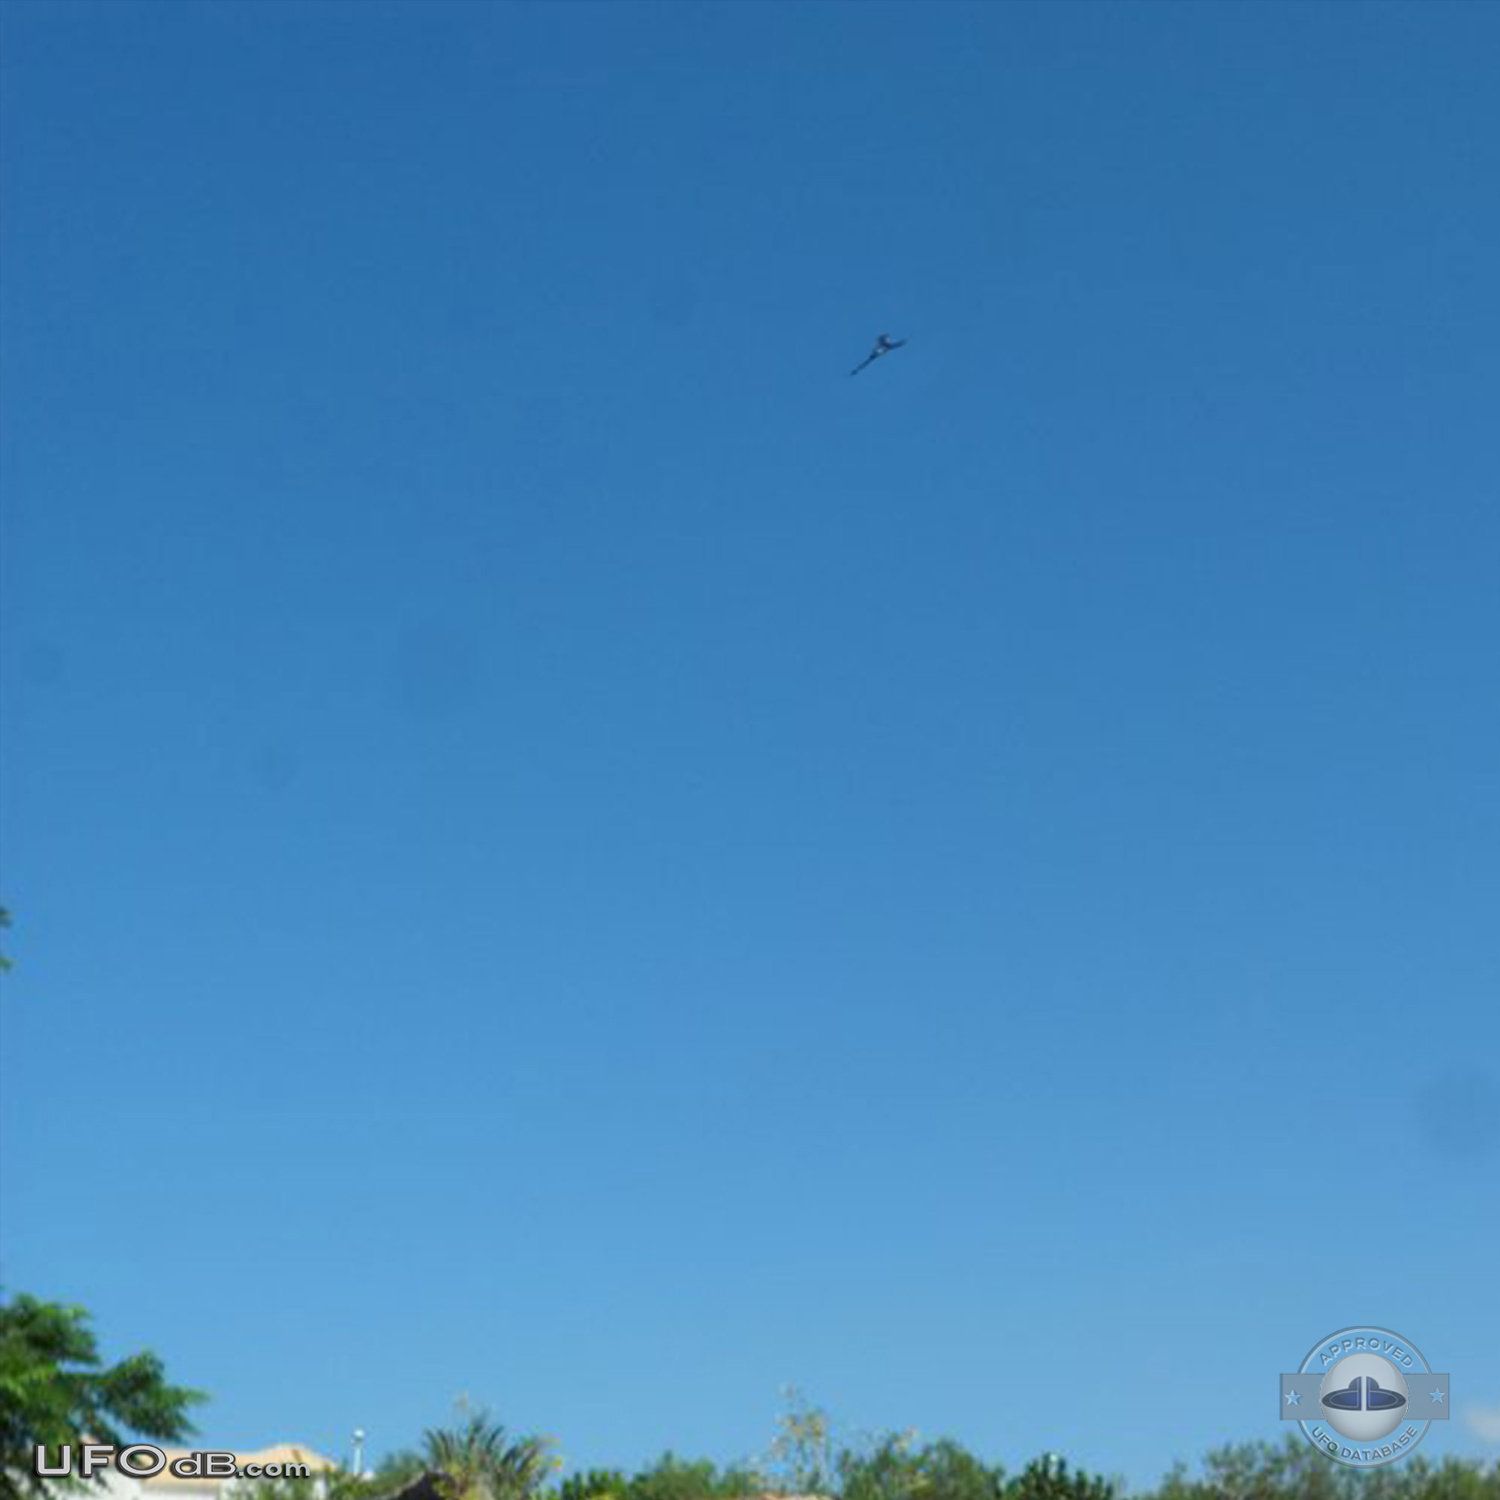 UFO similar to Star Trek Klingon ship seen over Canary Island in 2011 UFO Picture #483-1